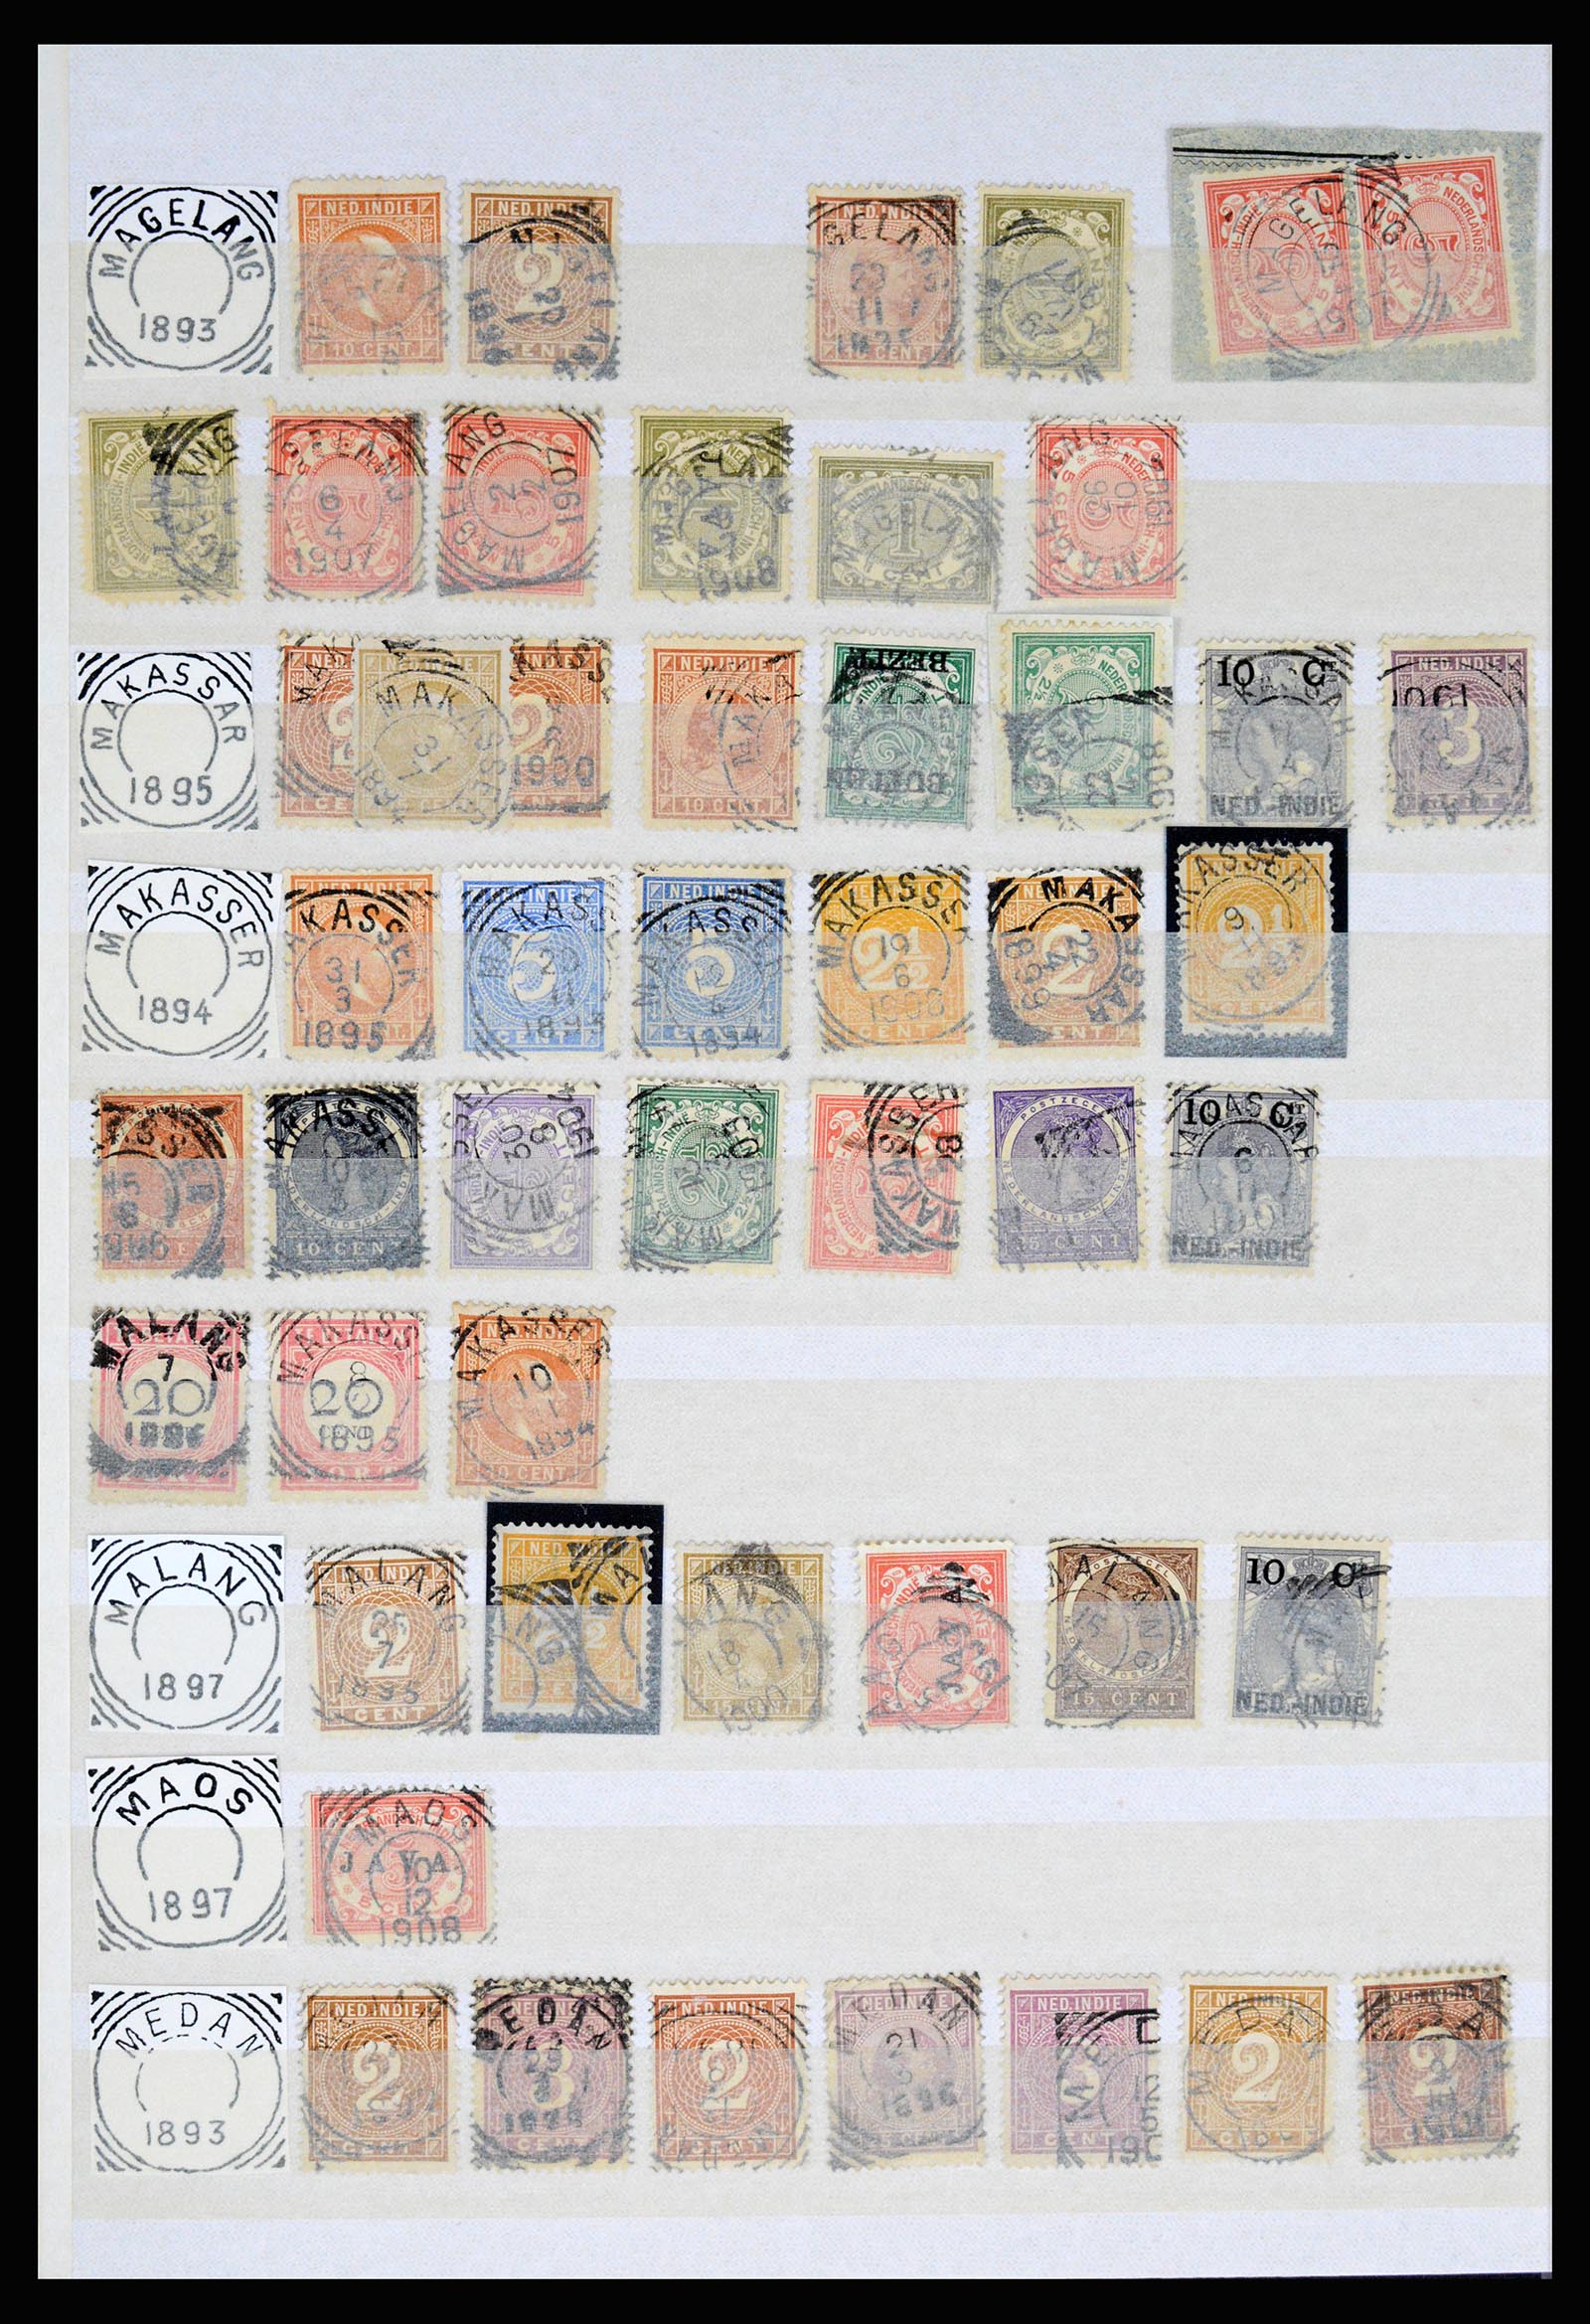 36839 077 - Stamp collection 36839 Dutch east Indies square cancels.